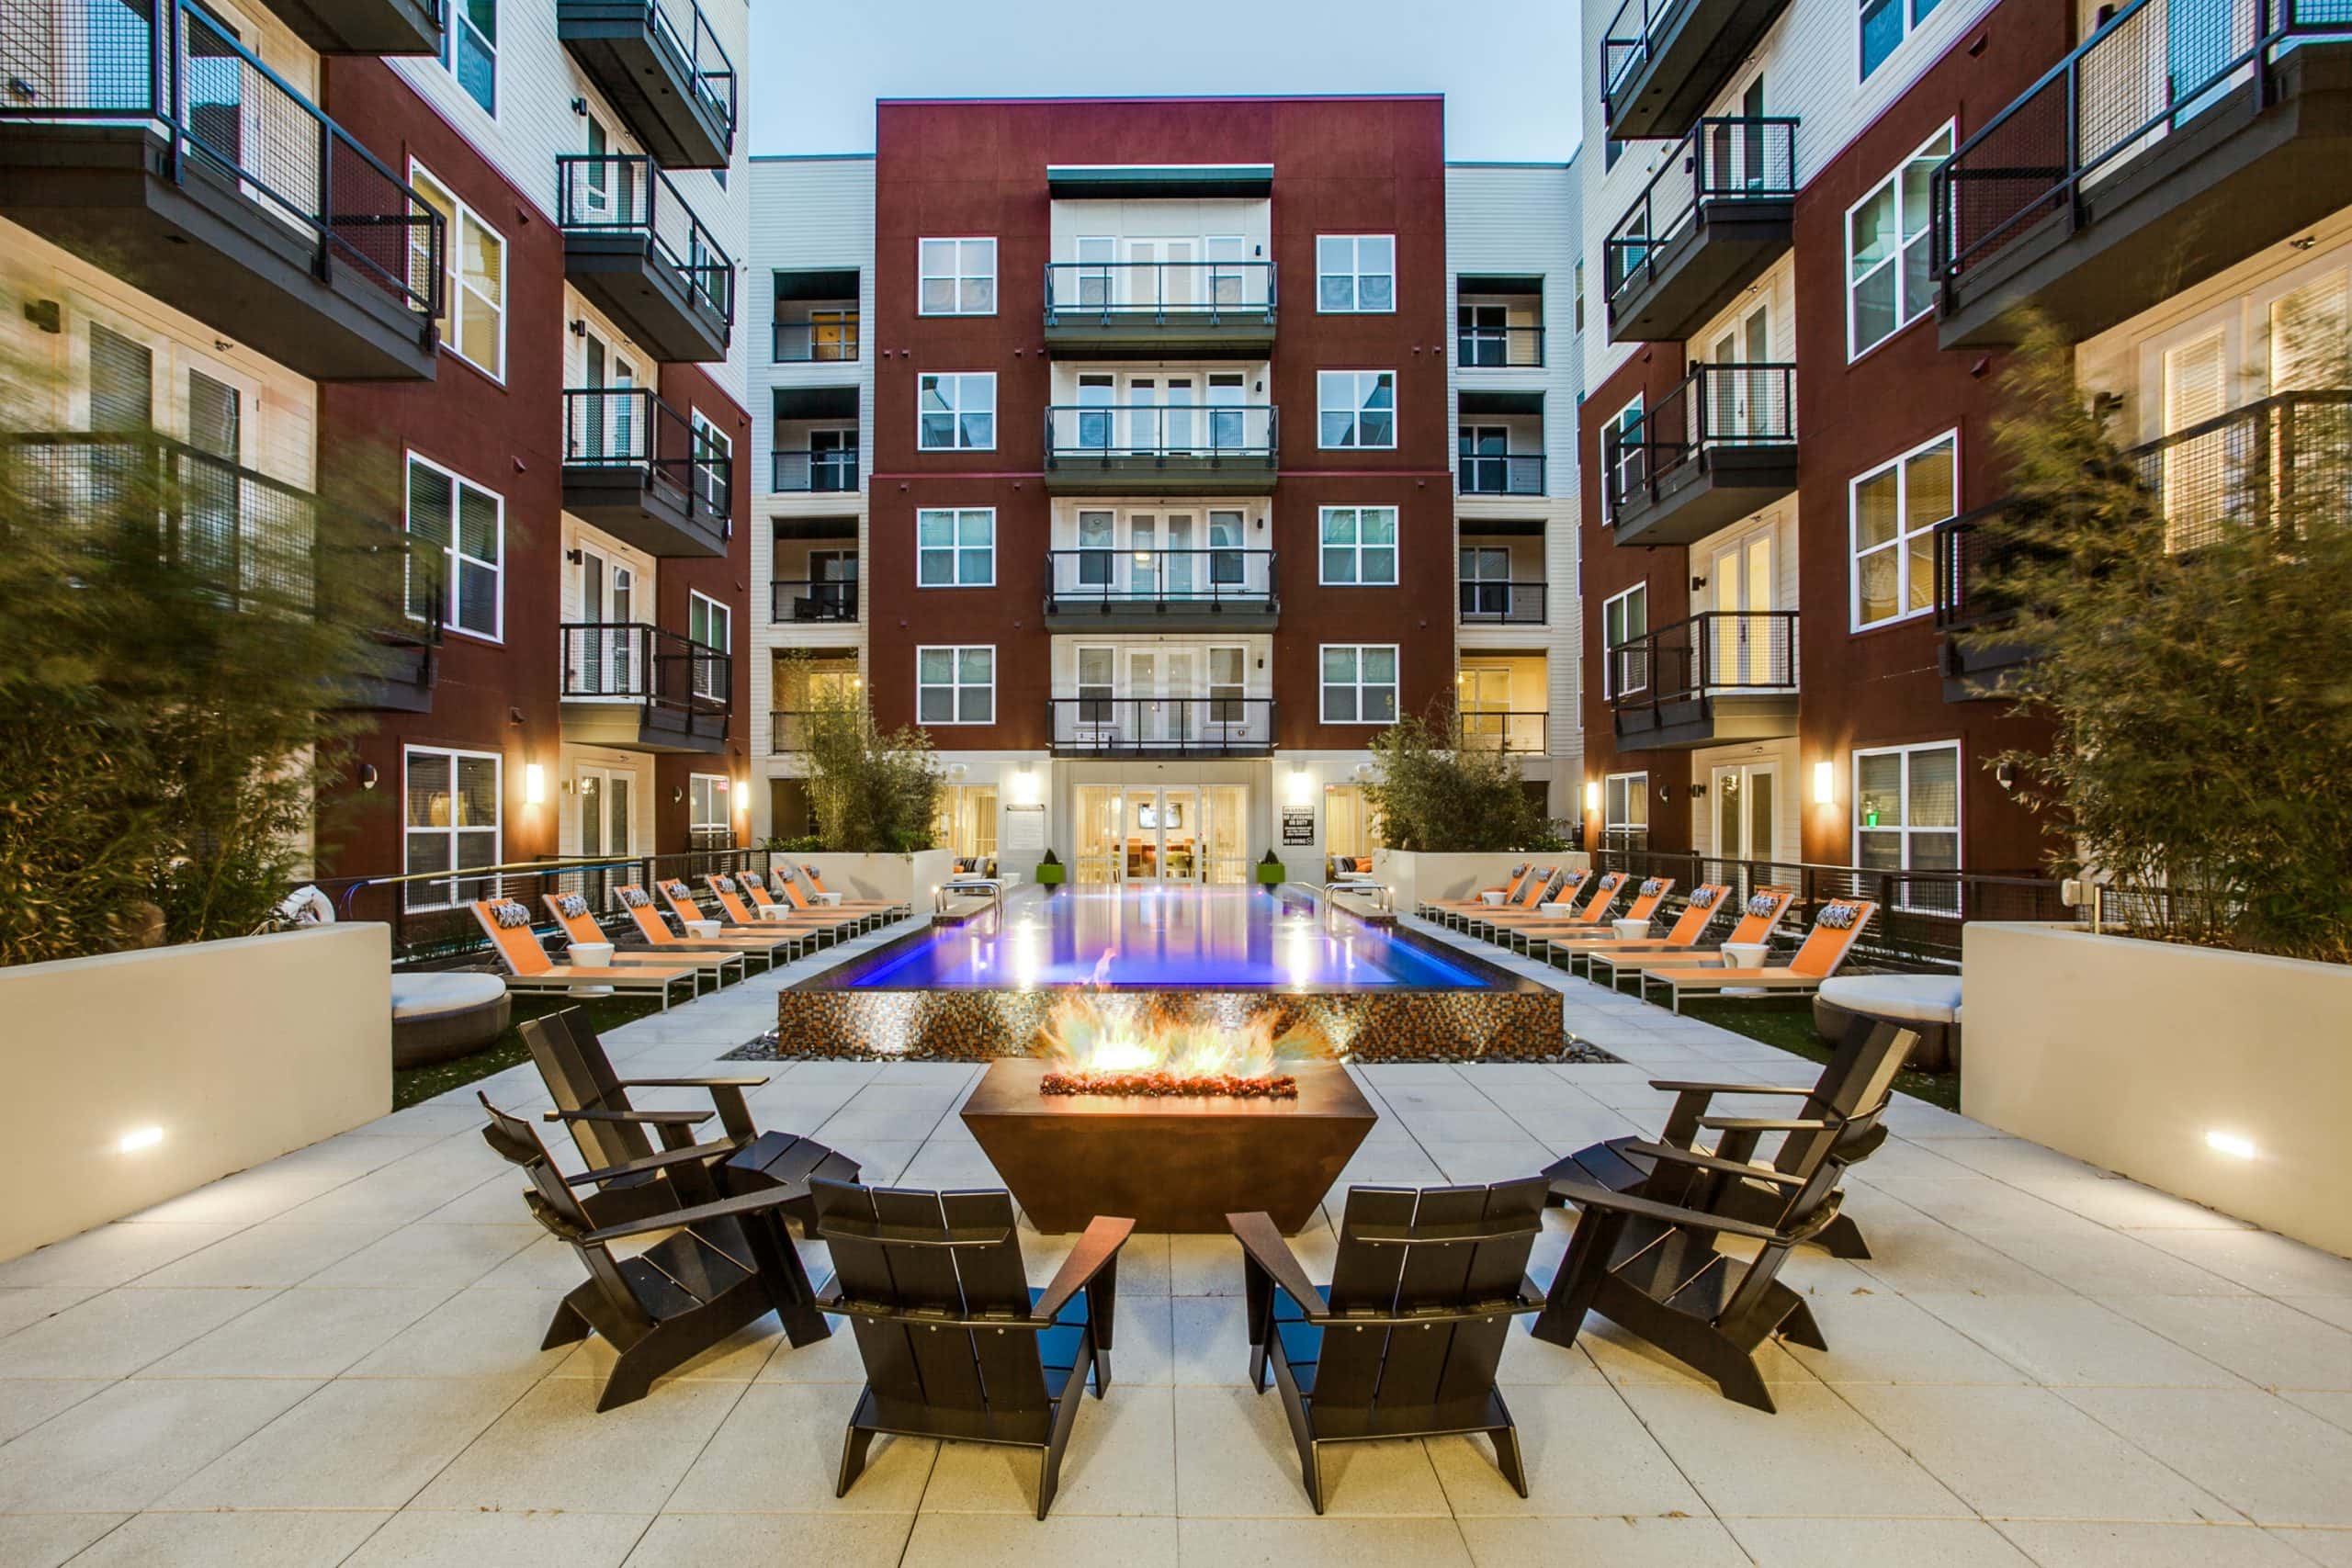 Bell Partners Acquires Dallas Multifamily Community